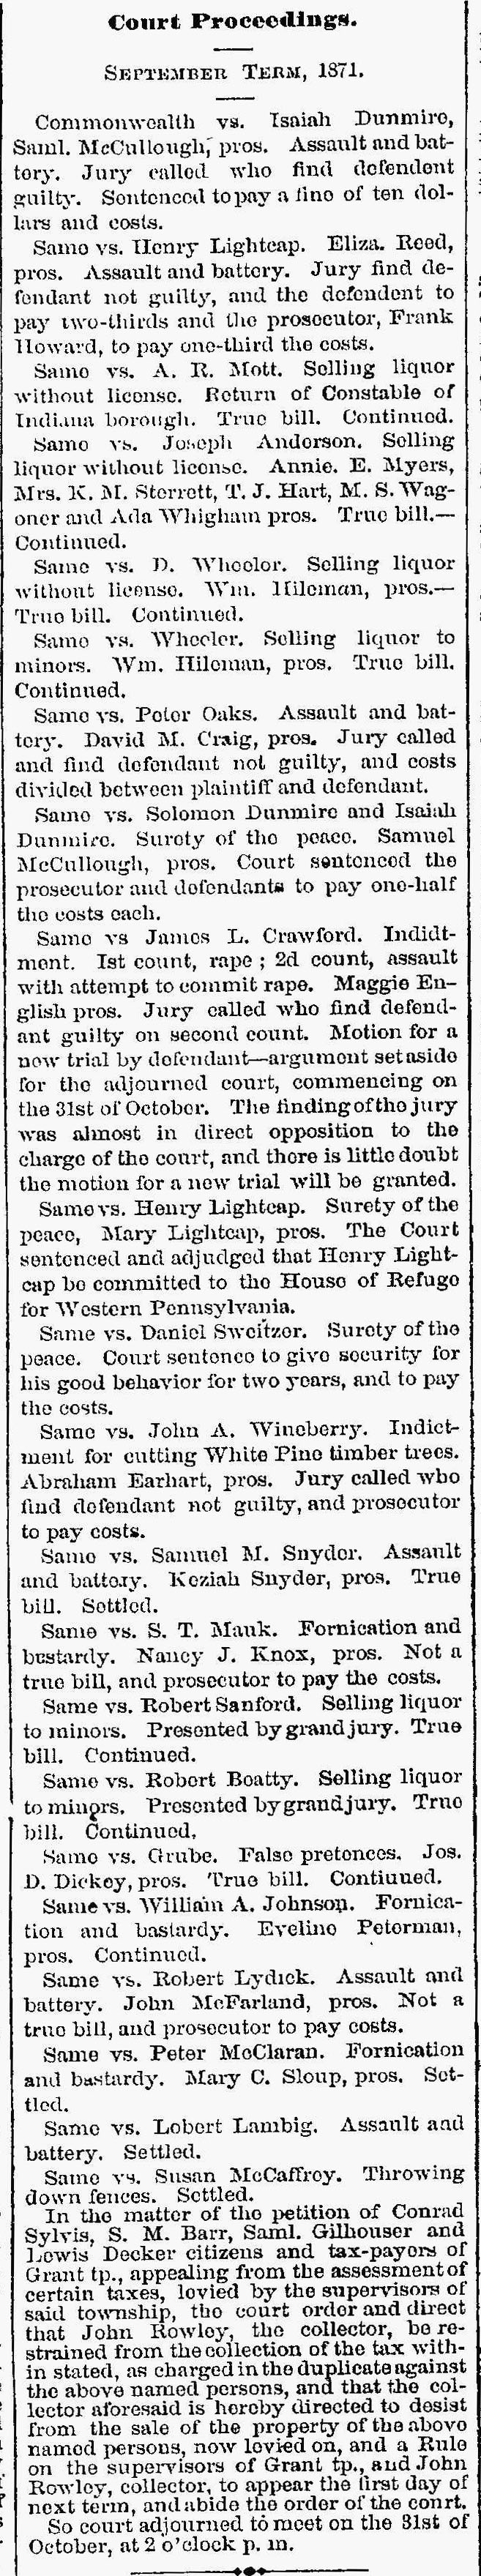 Indiana County PA Court Proceedings September 1871